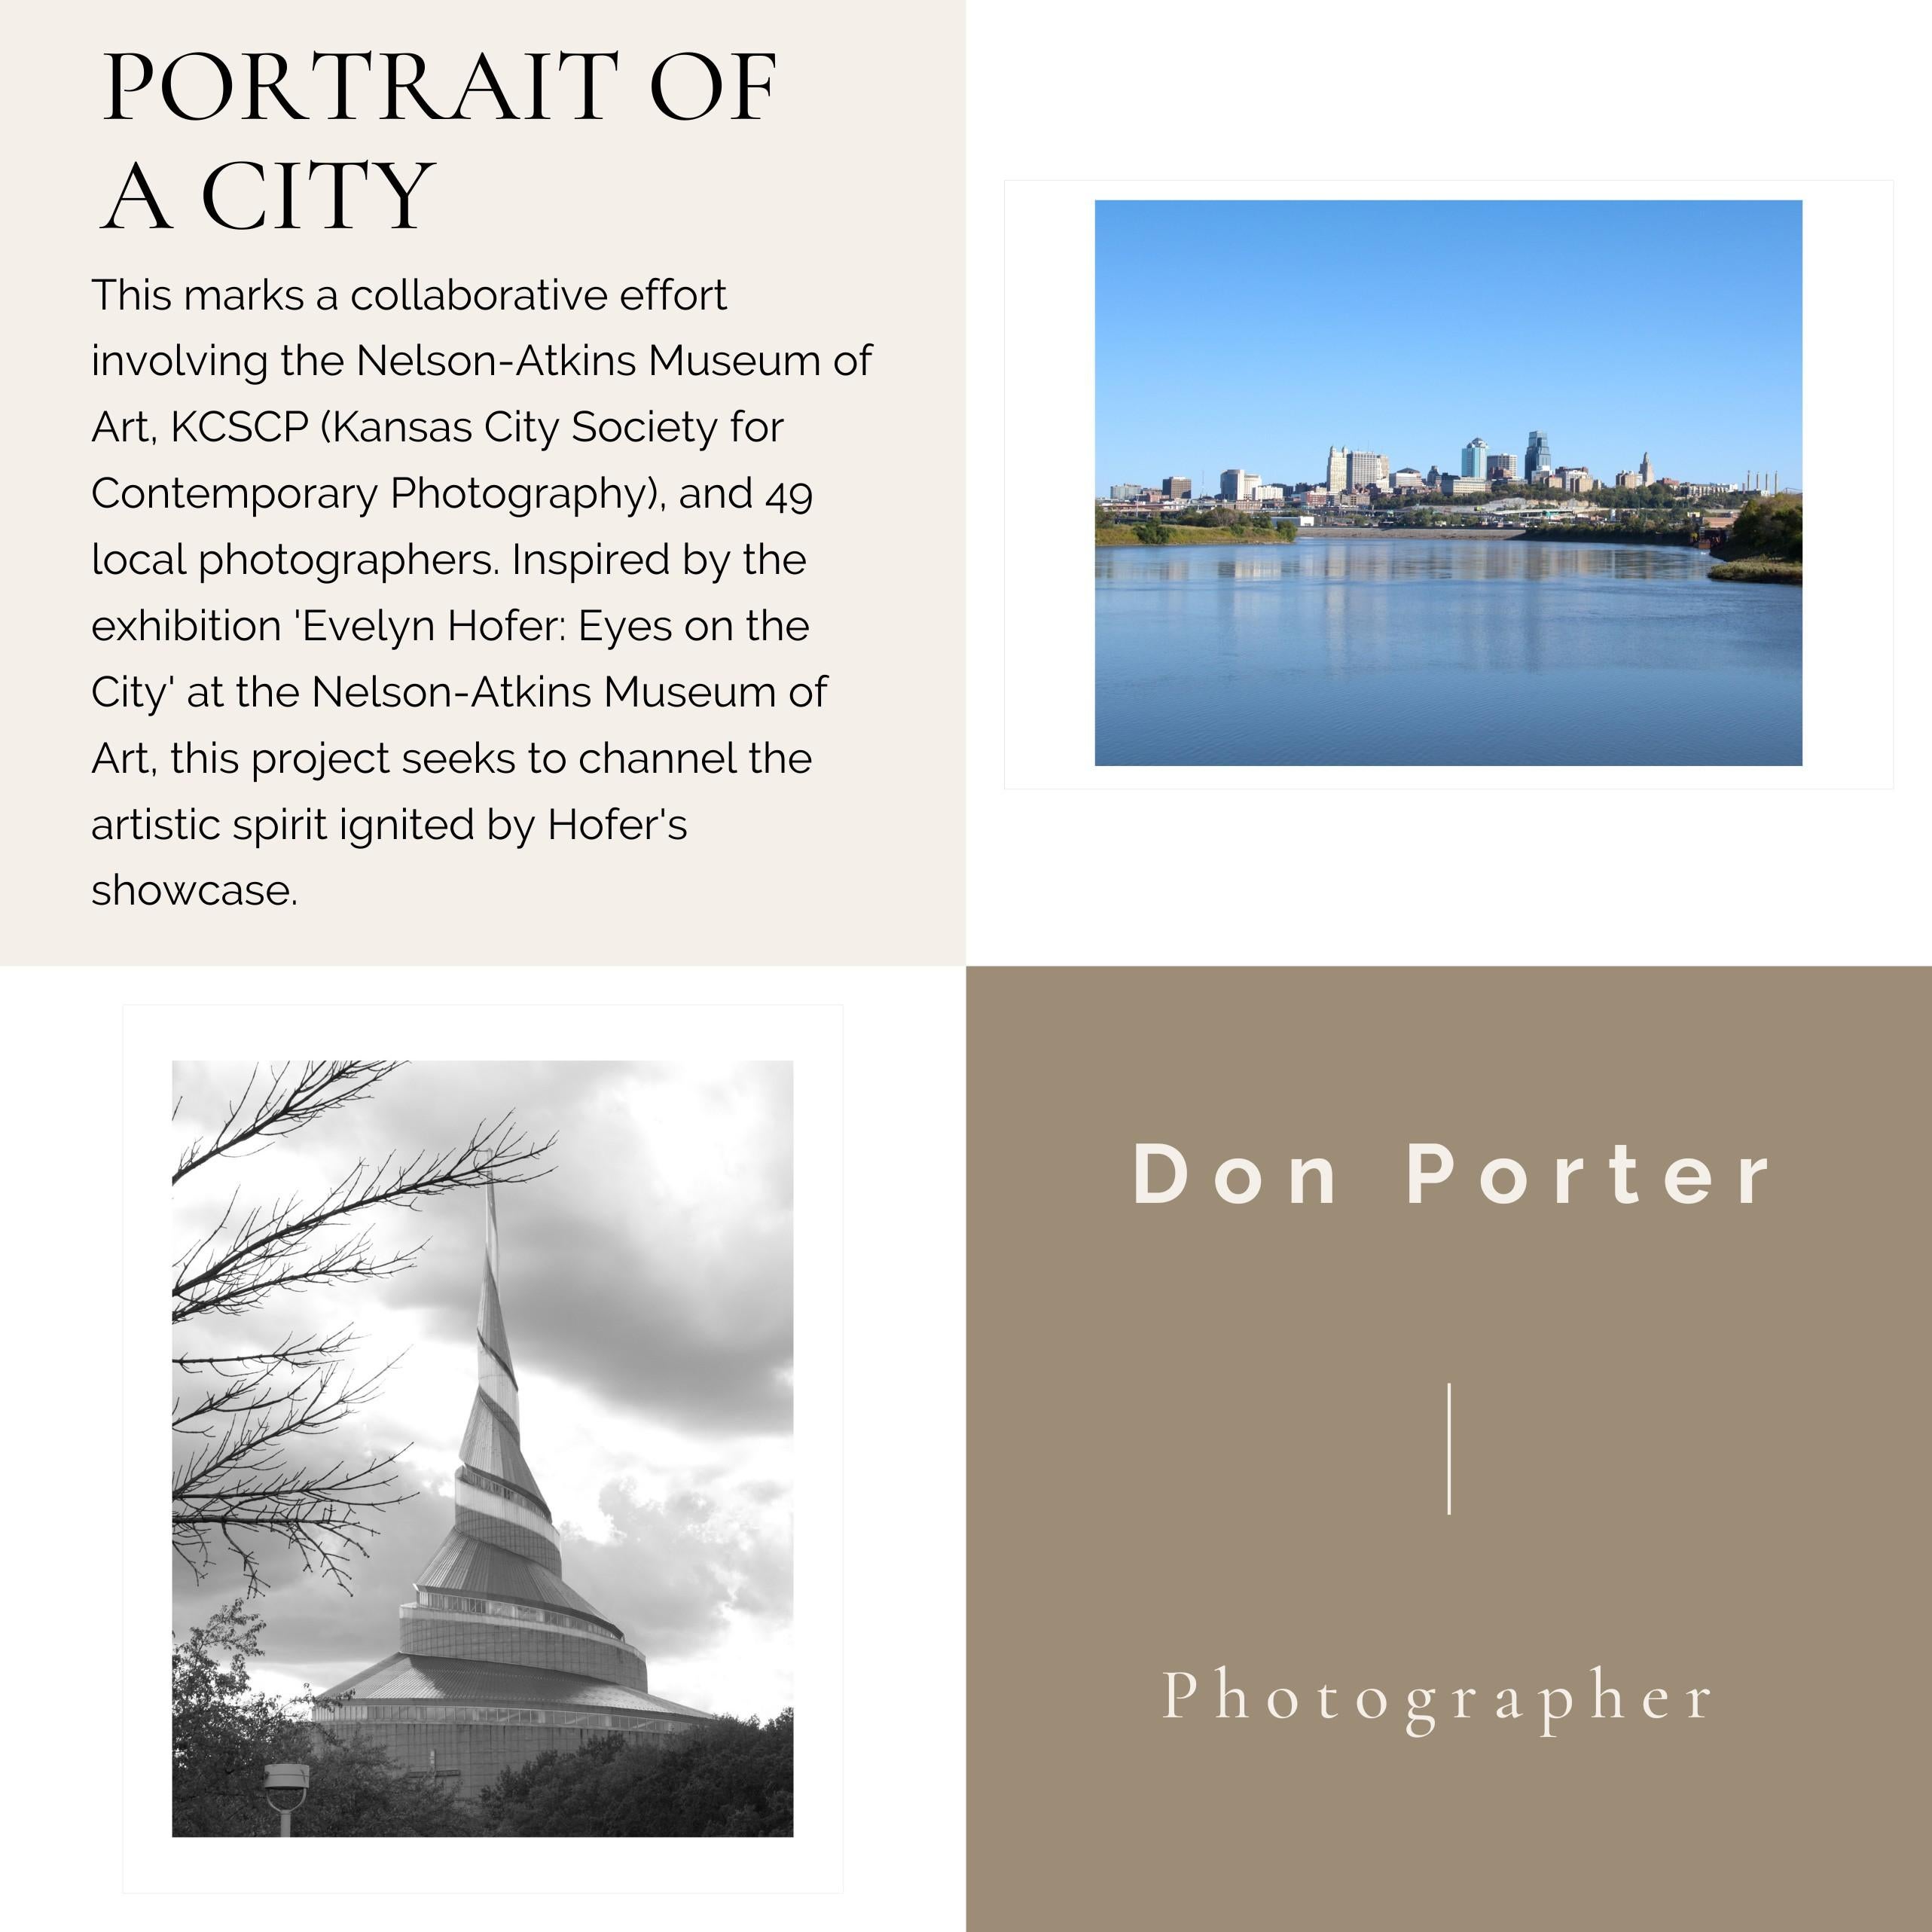 Don Porter
Kaw Point
Year: 2024
Archival Pigment Print on
Hahnemuehle Baryta Rag
Framed Size: 13 x 13 x 0.25 inches
COA provided
*Ready to hang; matted and framed in a minimal black frame made from composite wood with standard plex

From 